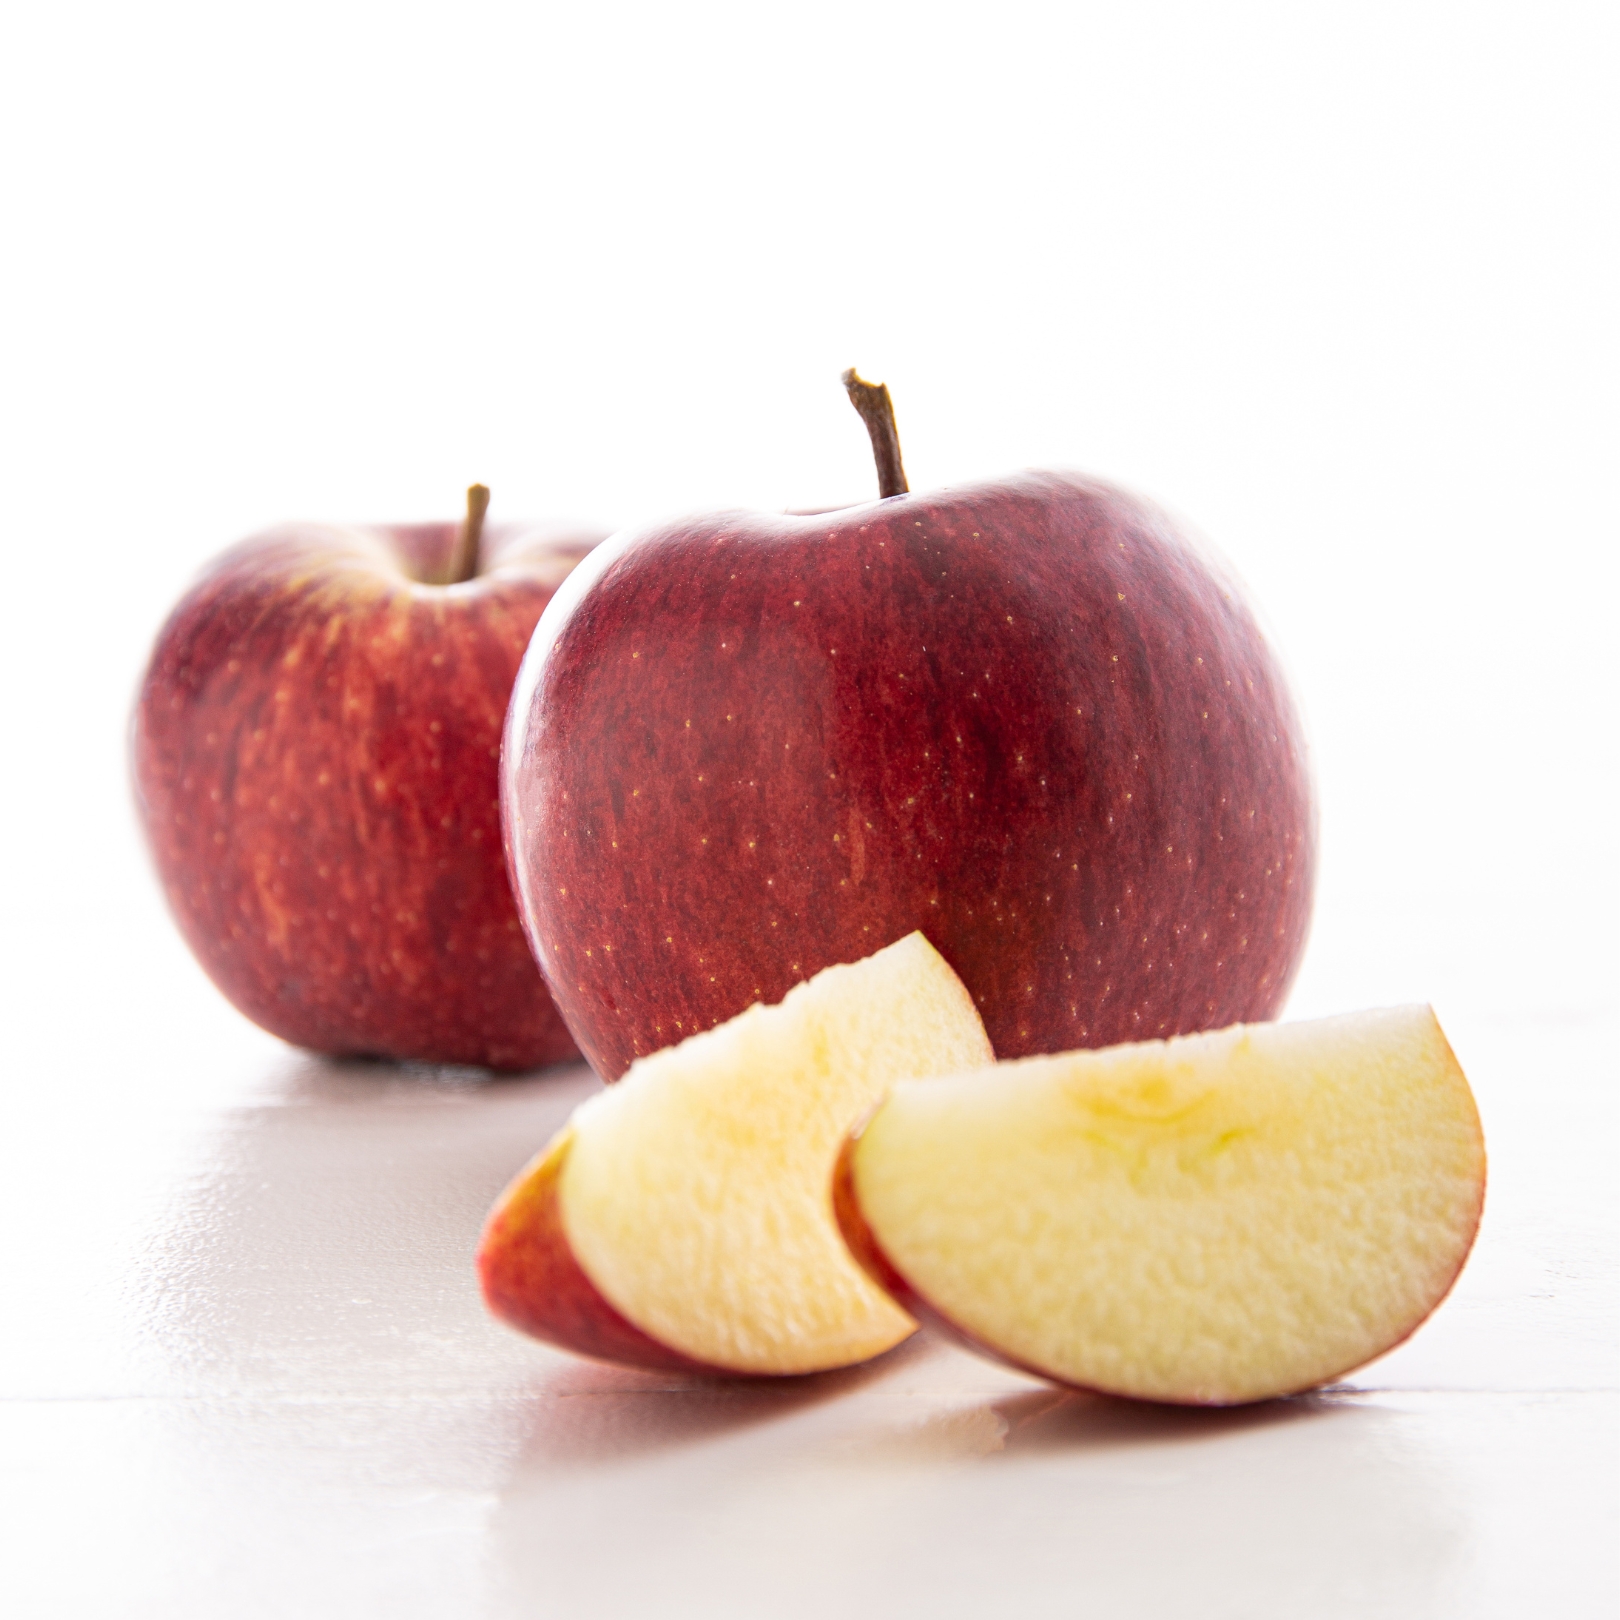 Buy Apples - Red Delicious Online NZ